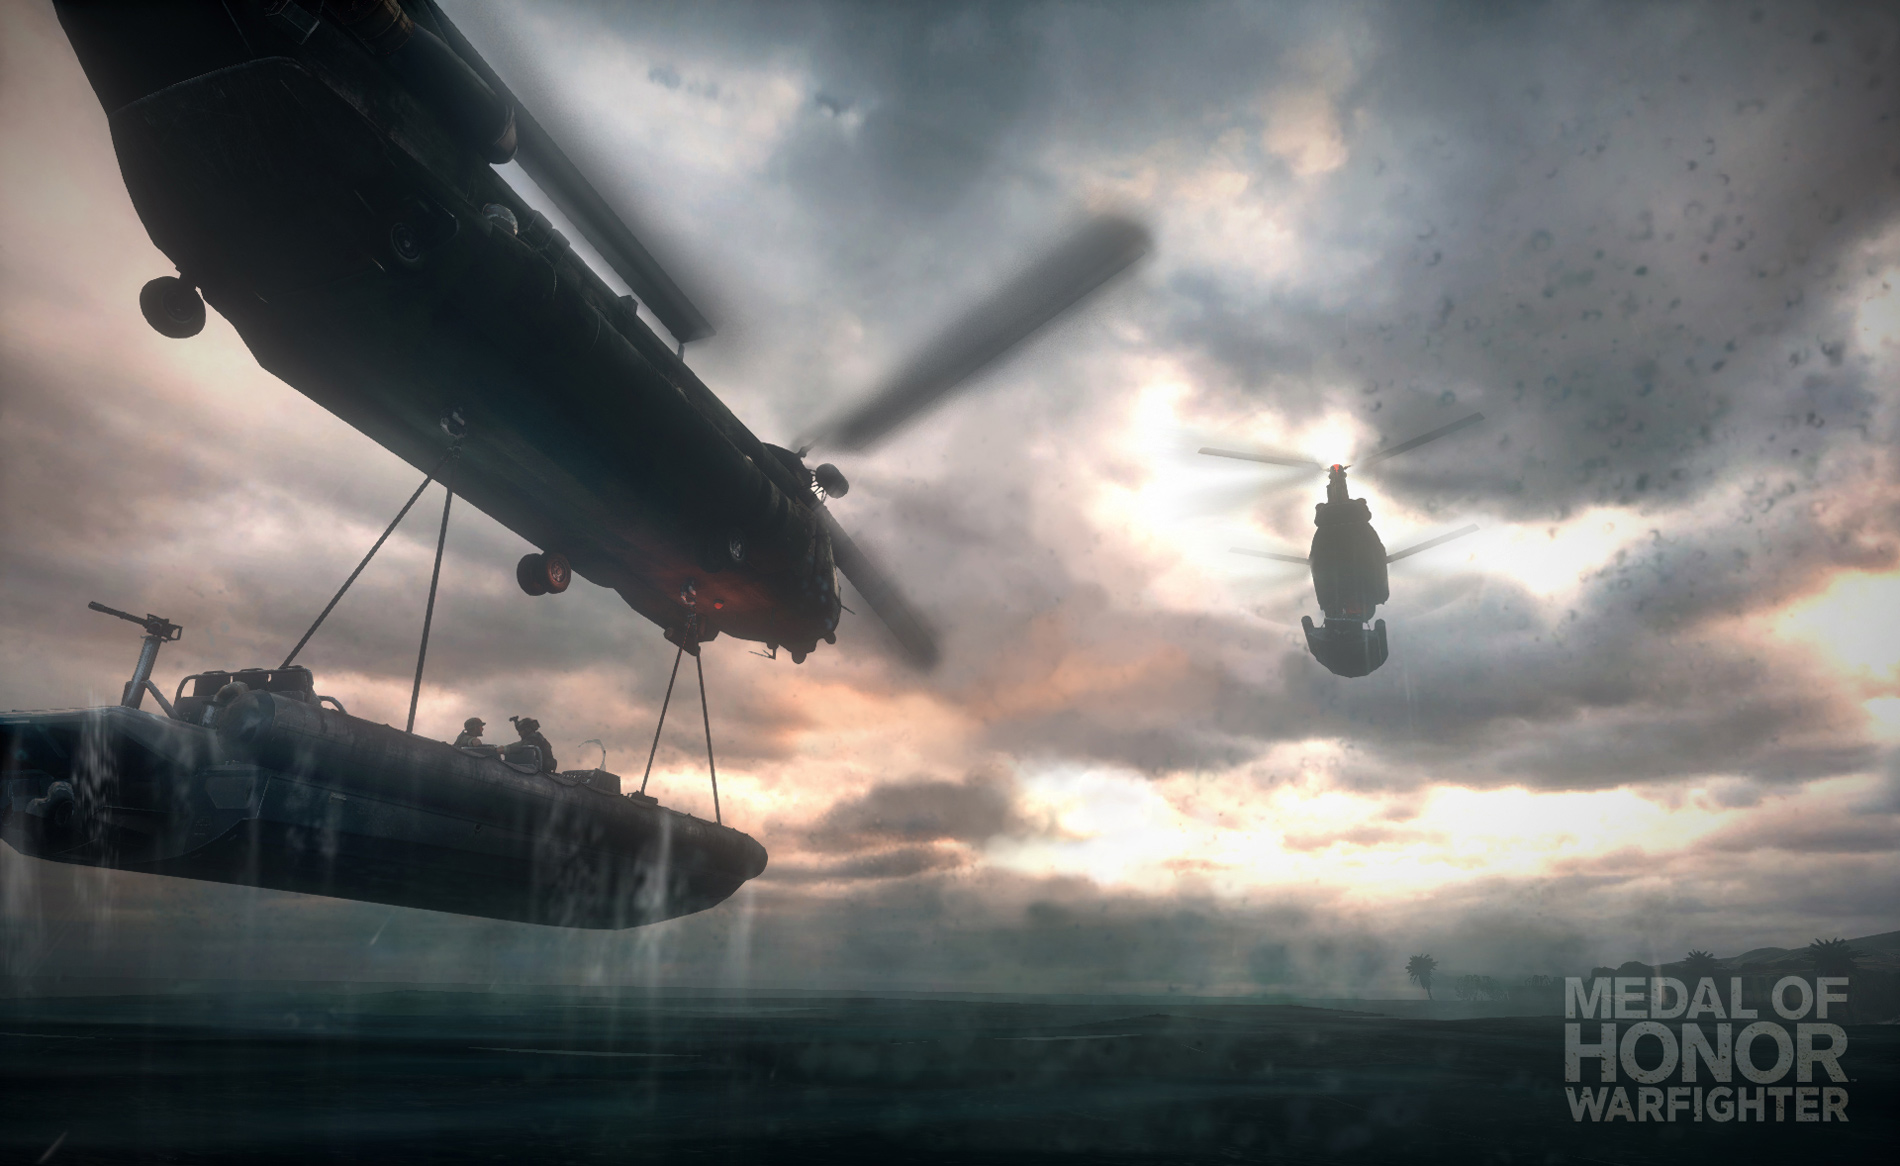 HD Wallpaper From Ea S Uping Game Medal Of Honor Warfighter